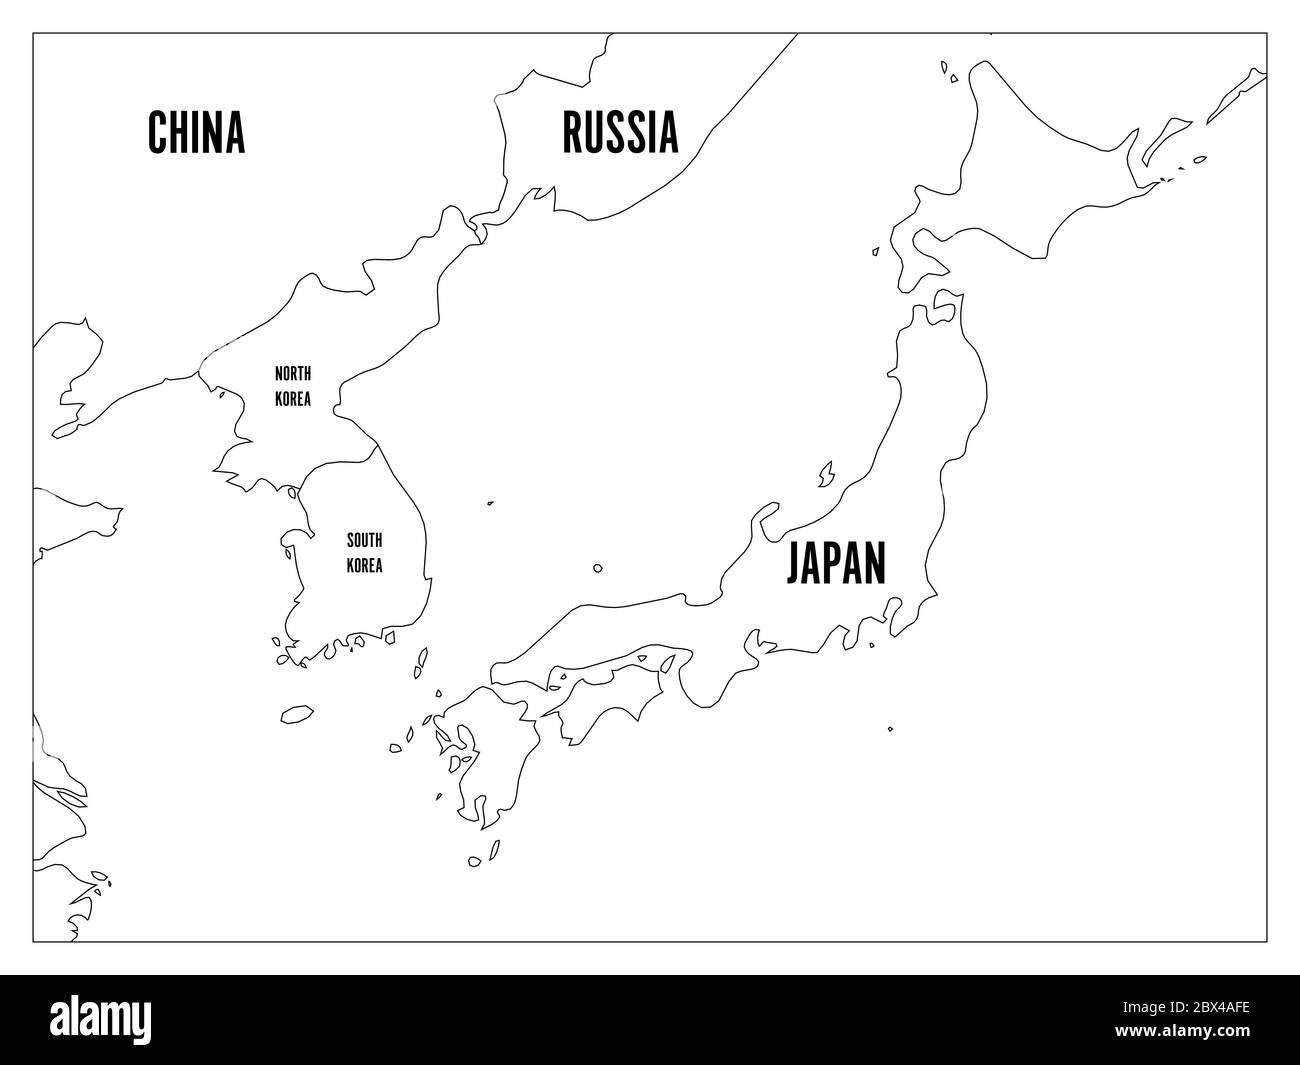 outline map of japan and korea Political Map Of Korean And Japanese Region South Korea North outline map of japan and korea